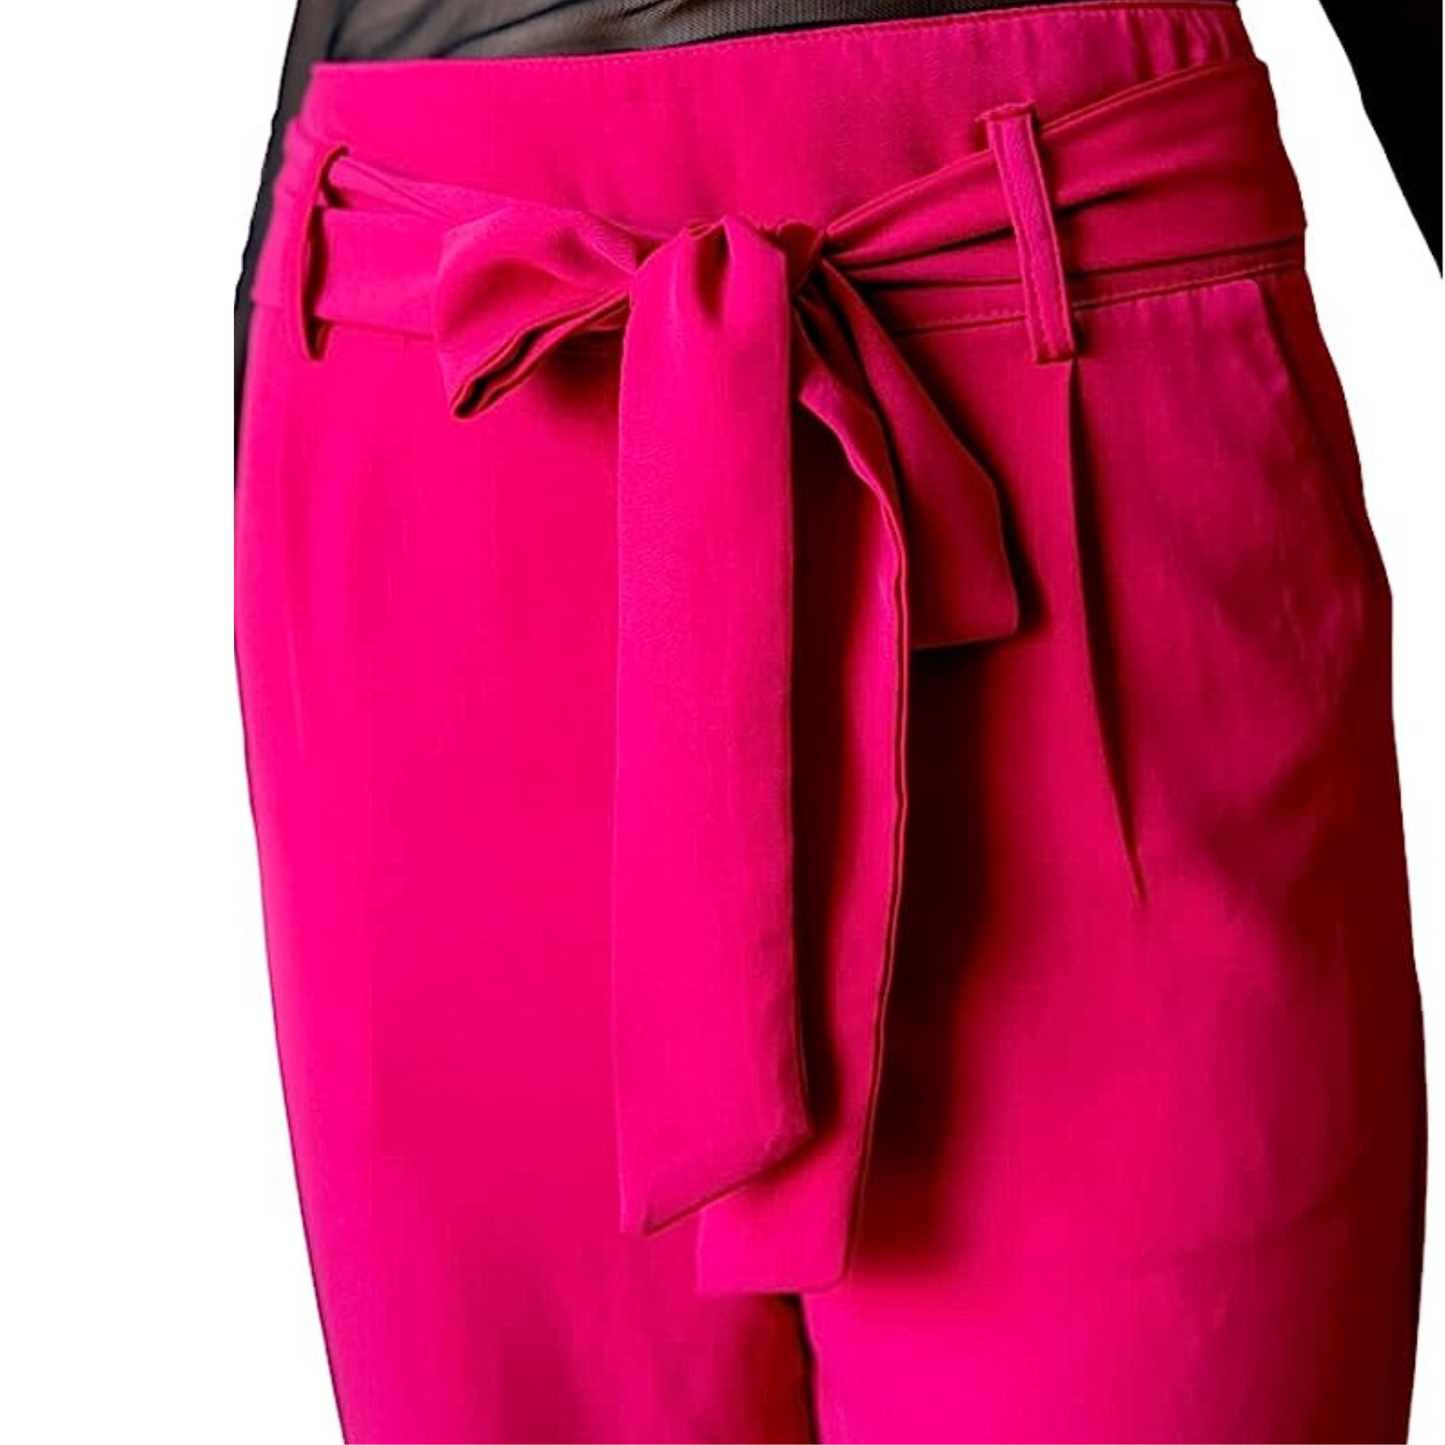 MAJESTIC PHARAOH Hot Pink High Waisted Pants, Wide Leg with Tie Waist Belt Casual Pants for Women Wide Leg Hampton Pants (Large)